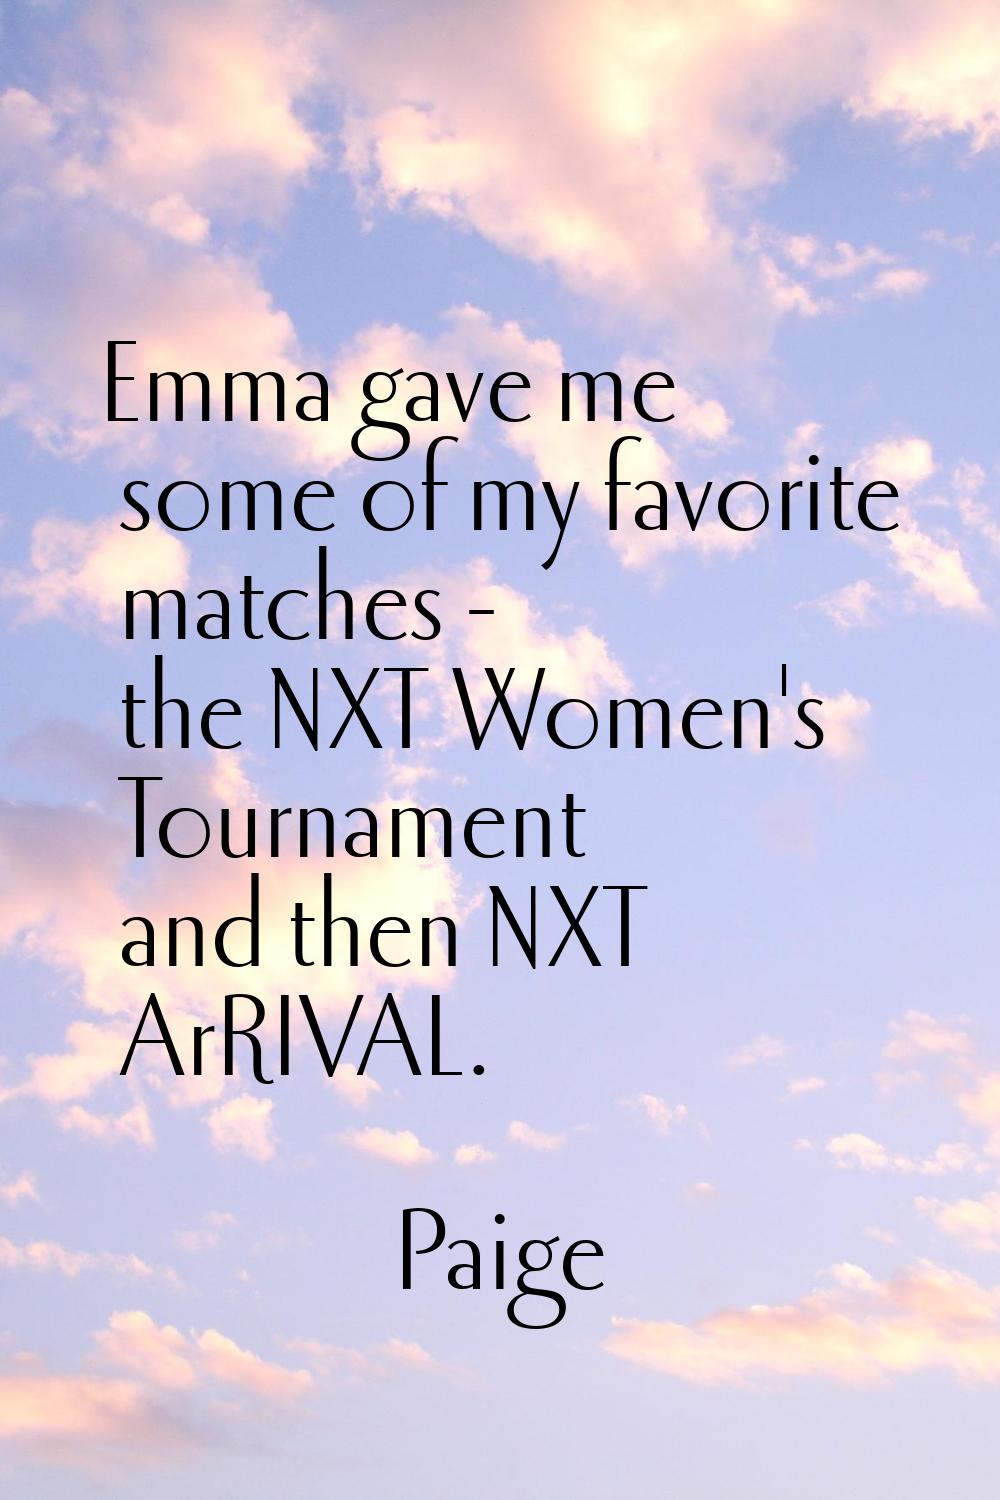 Emma gave me some of my favorite matches - the NXT Women's Tournament and then NXT ArRIVAL.